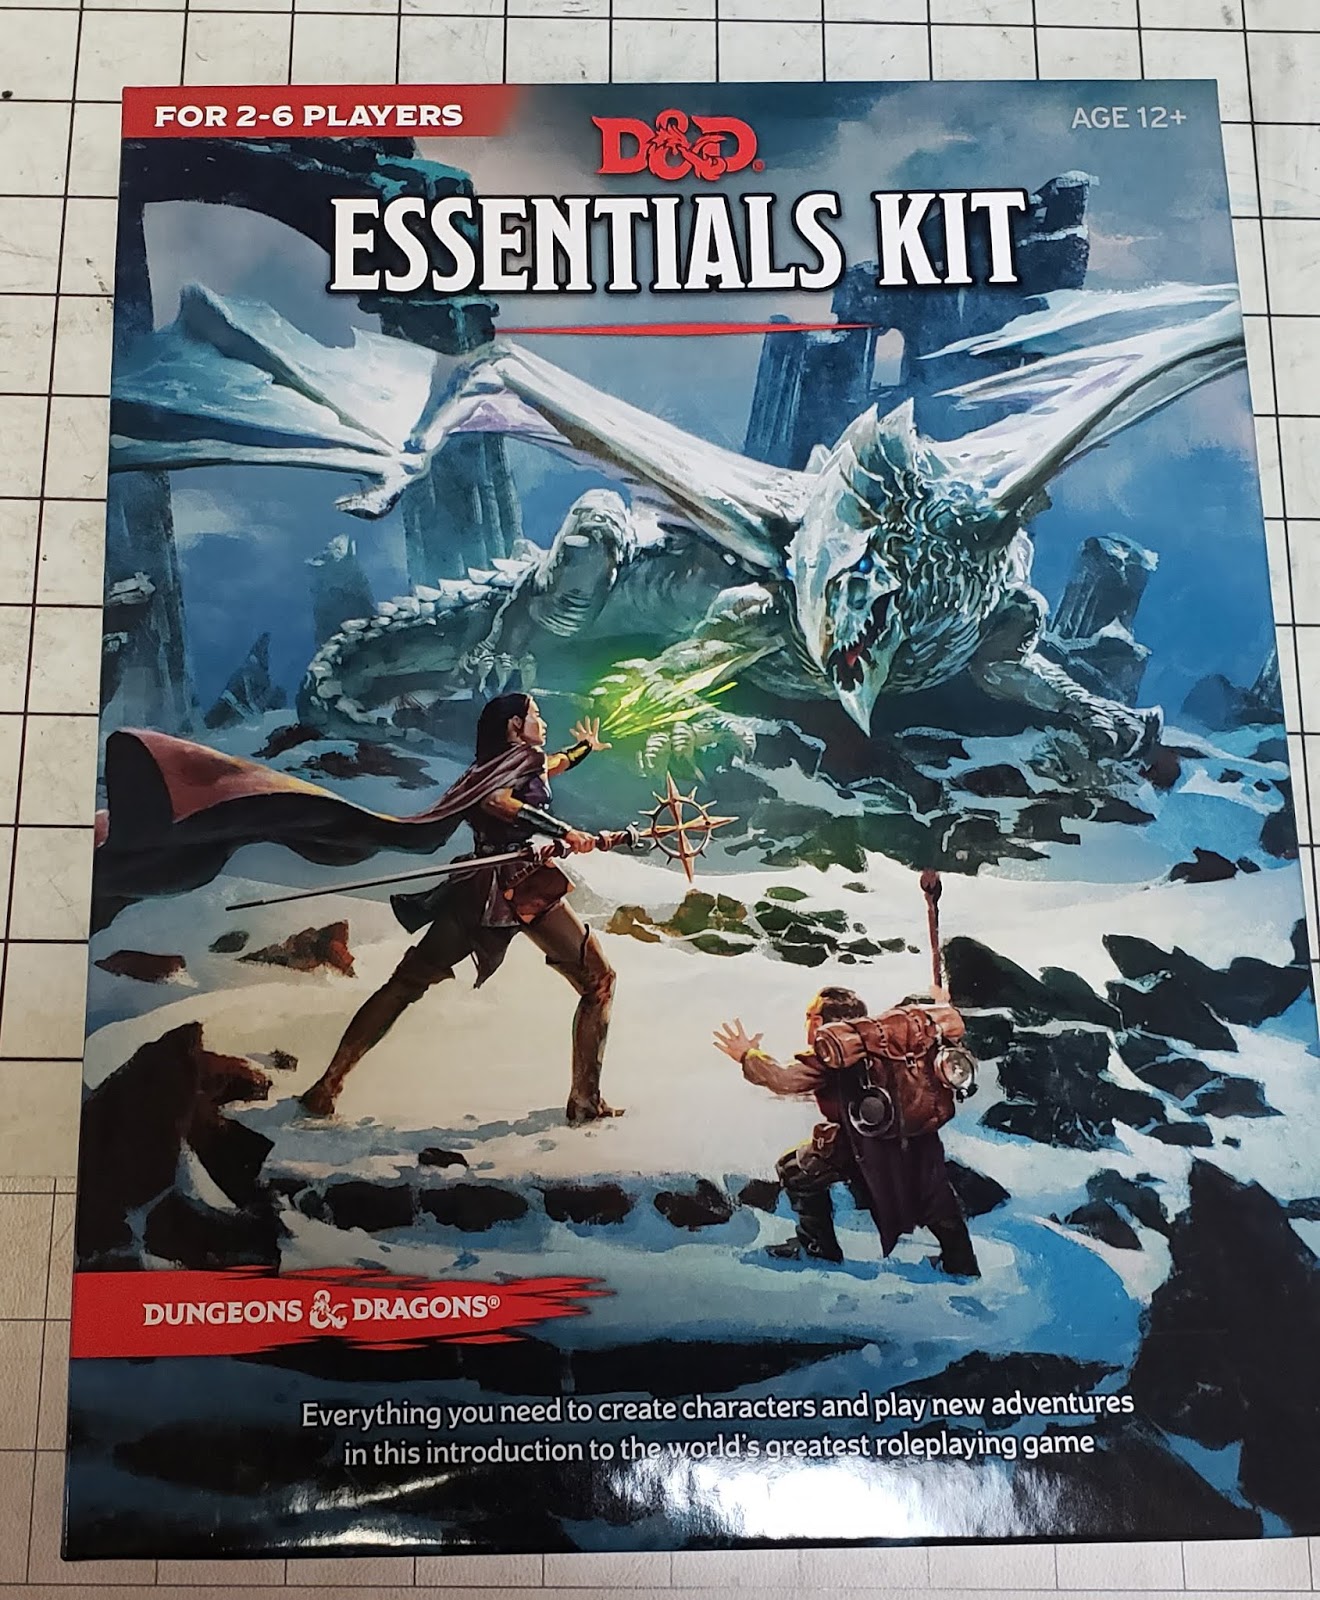 The Other Side blog: D&D Essentials Kit: Unboxing and Review